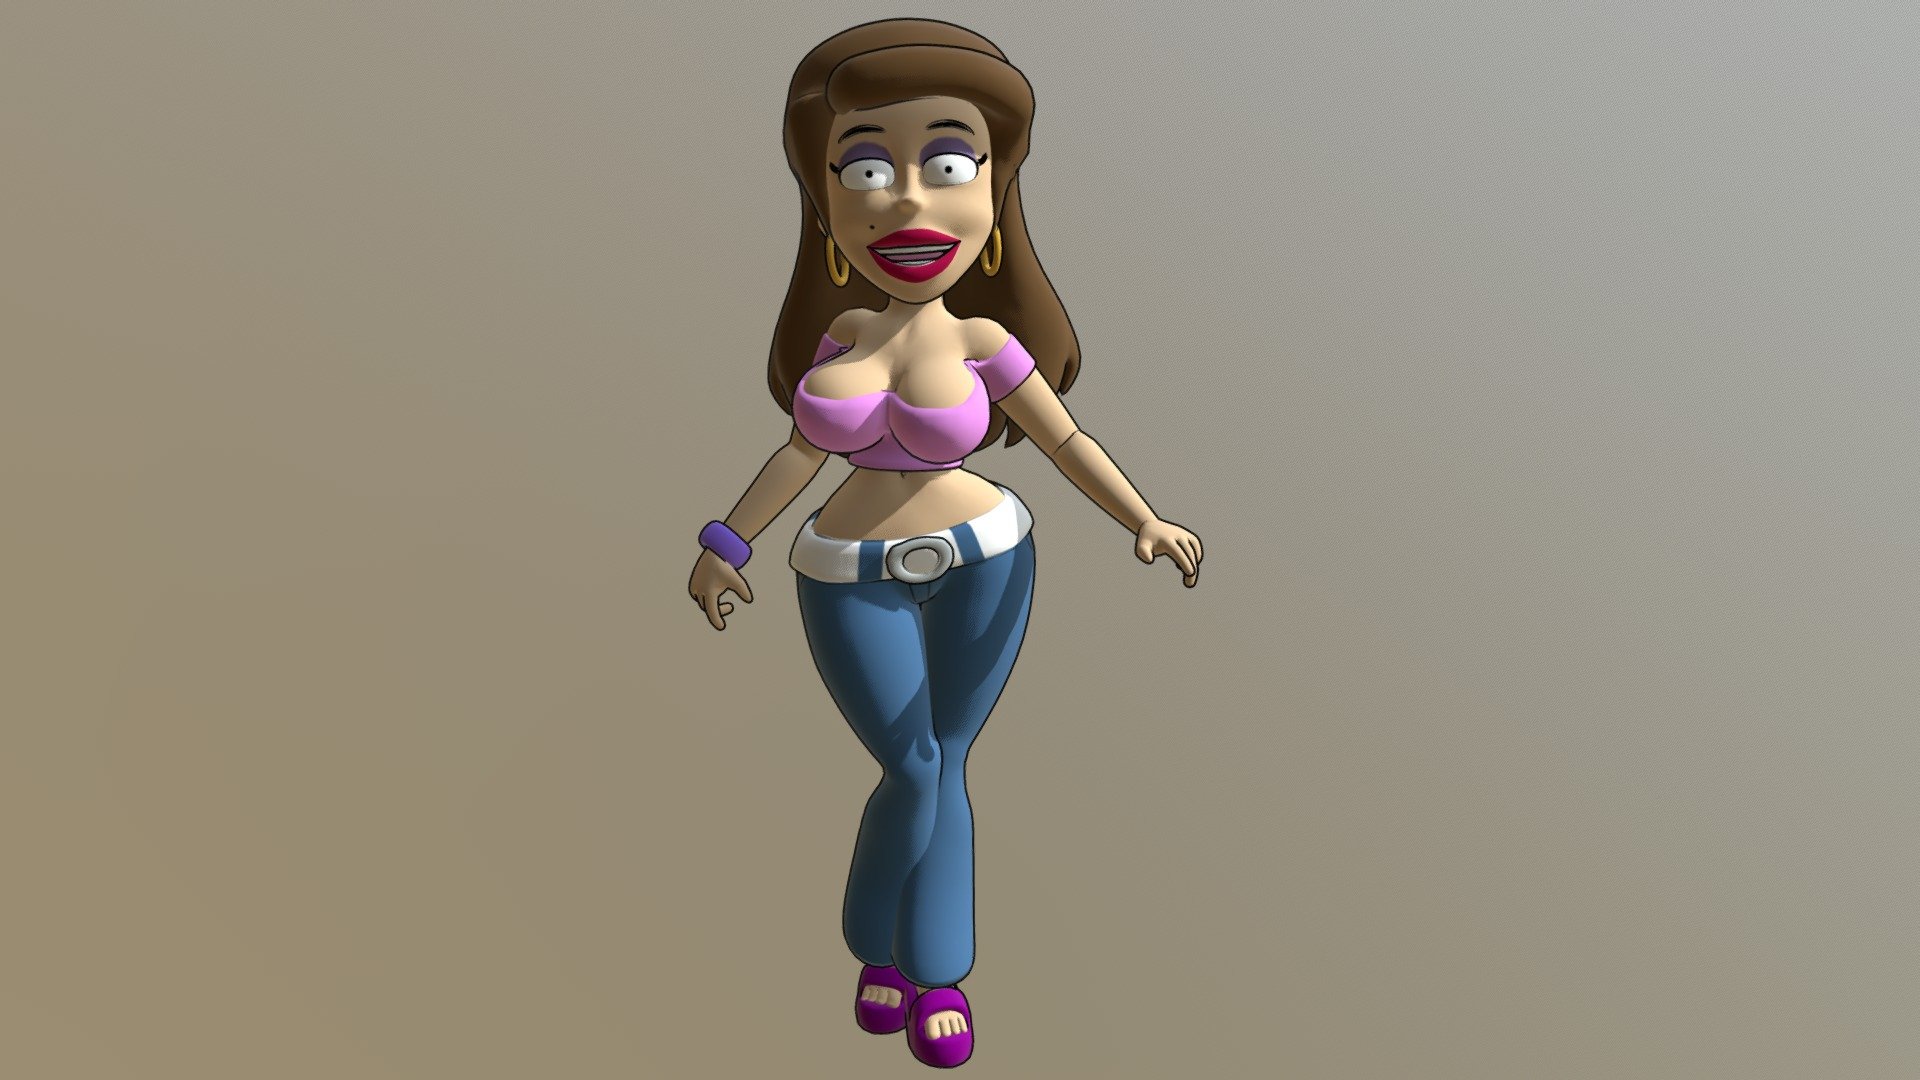 Babs Brando - 3D model by Placidone.